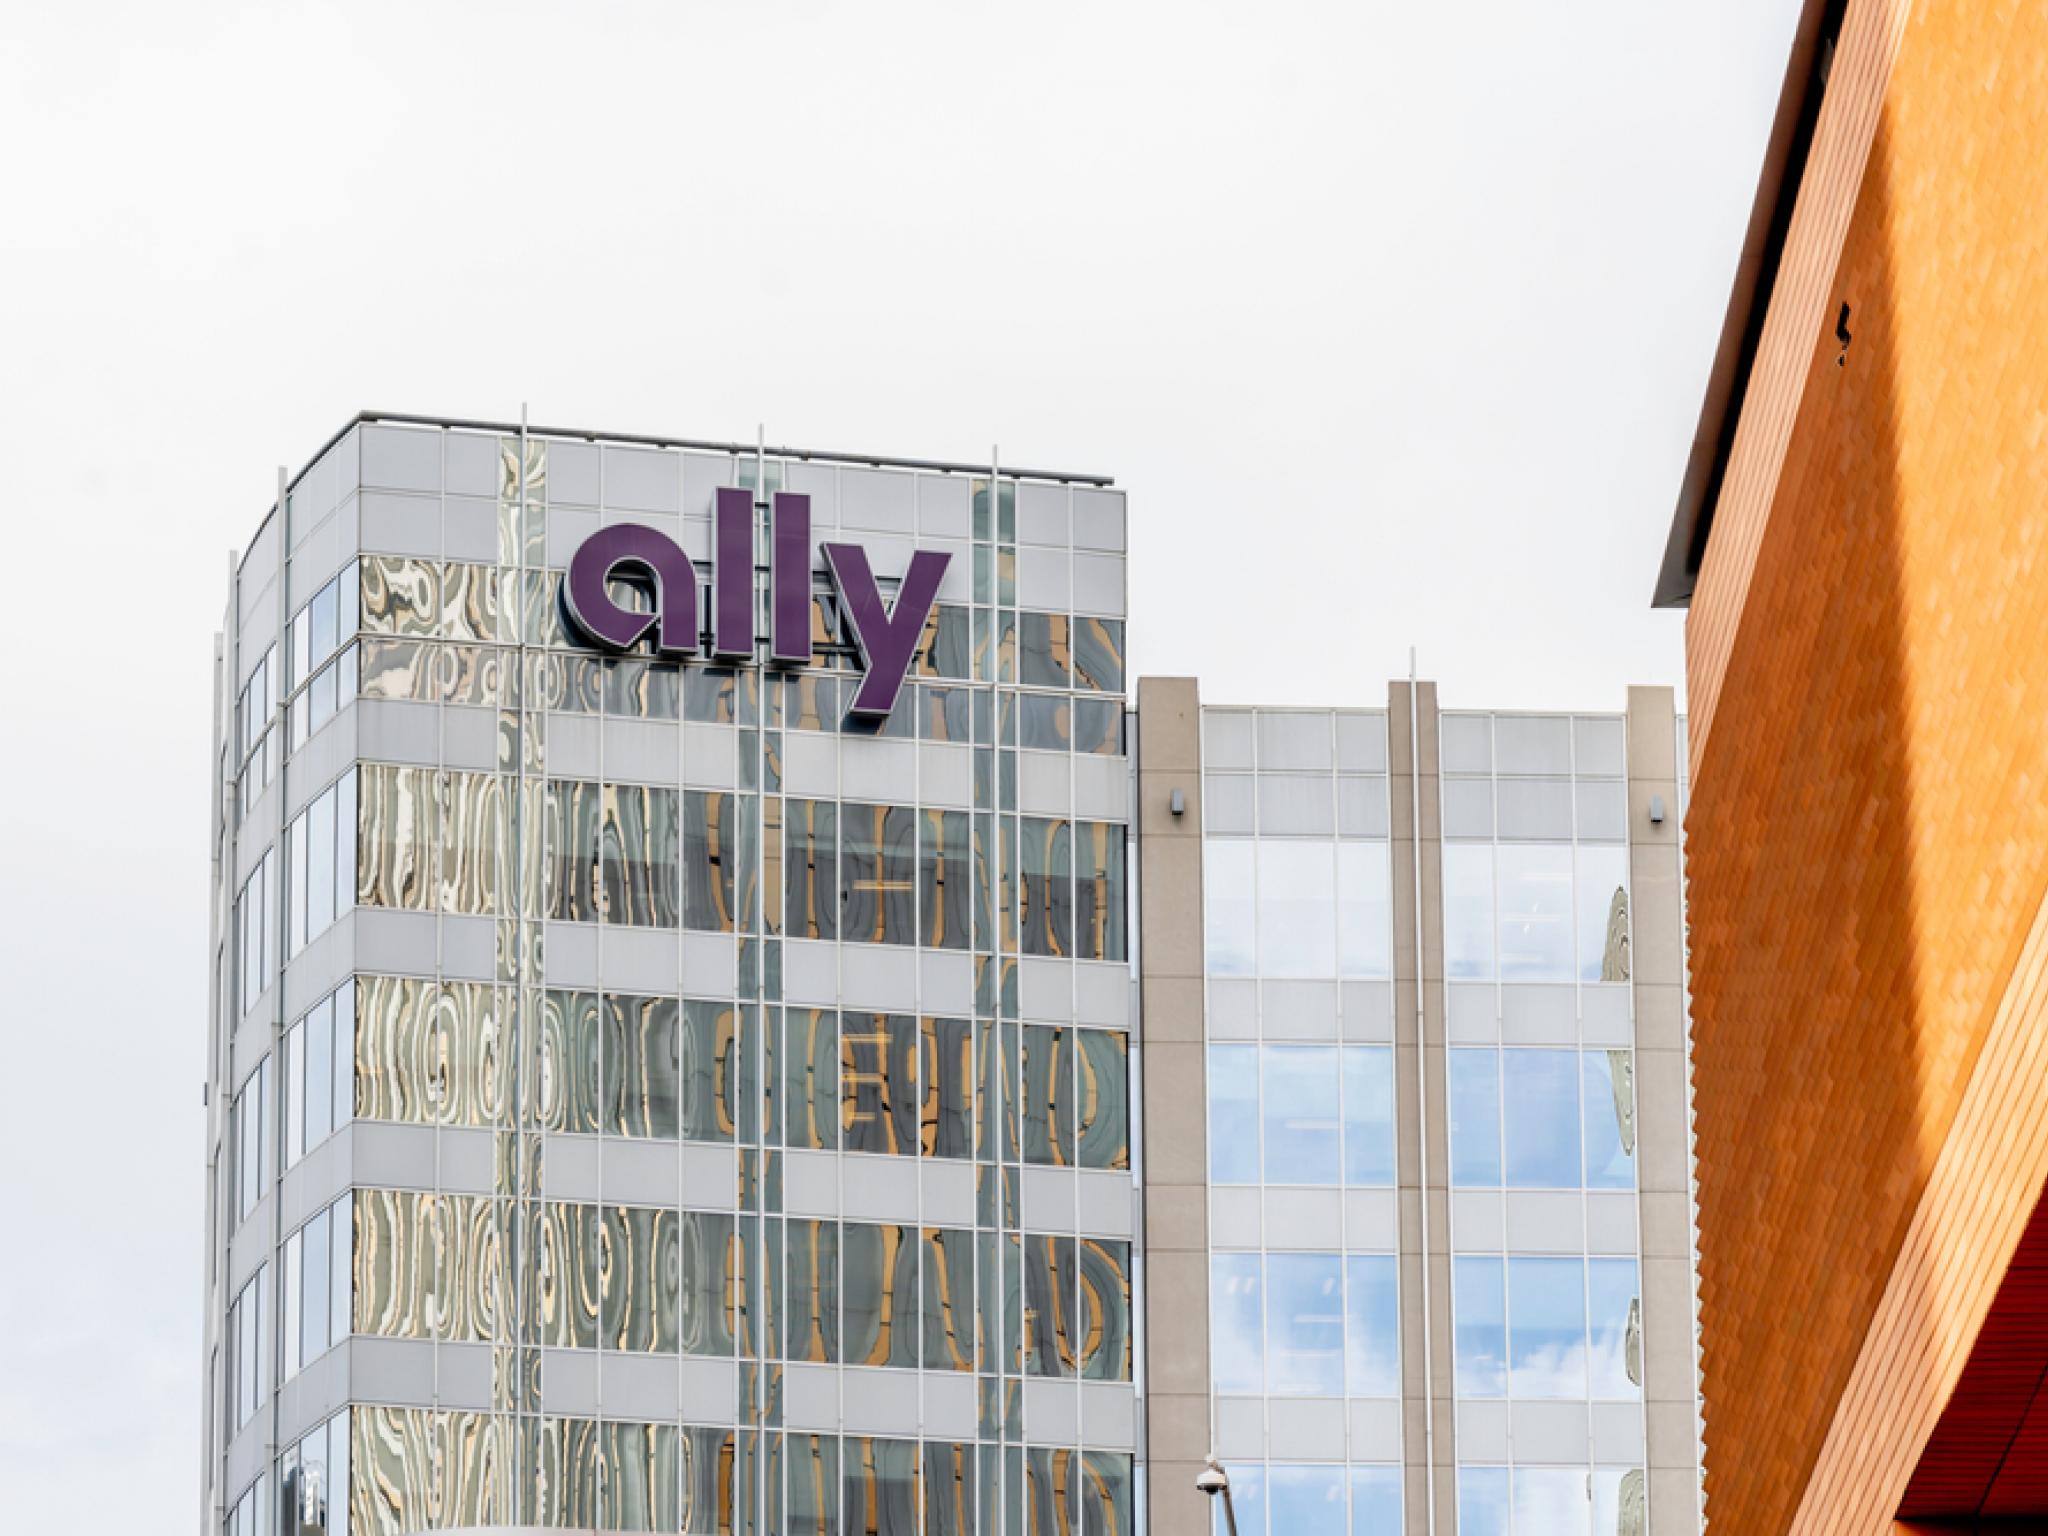  ally-financial-analyst-sees-consistent-margin-expansion-ahead-q2-results-breakdown 